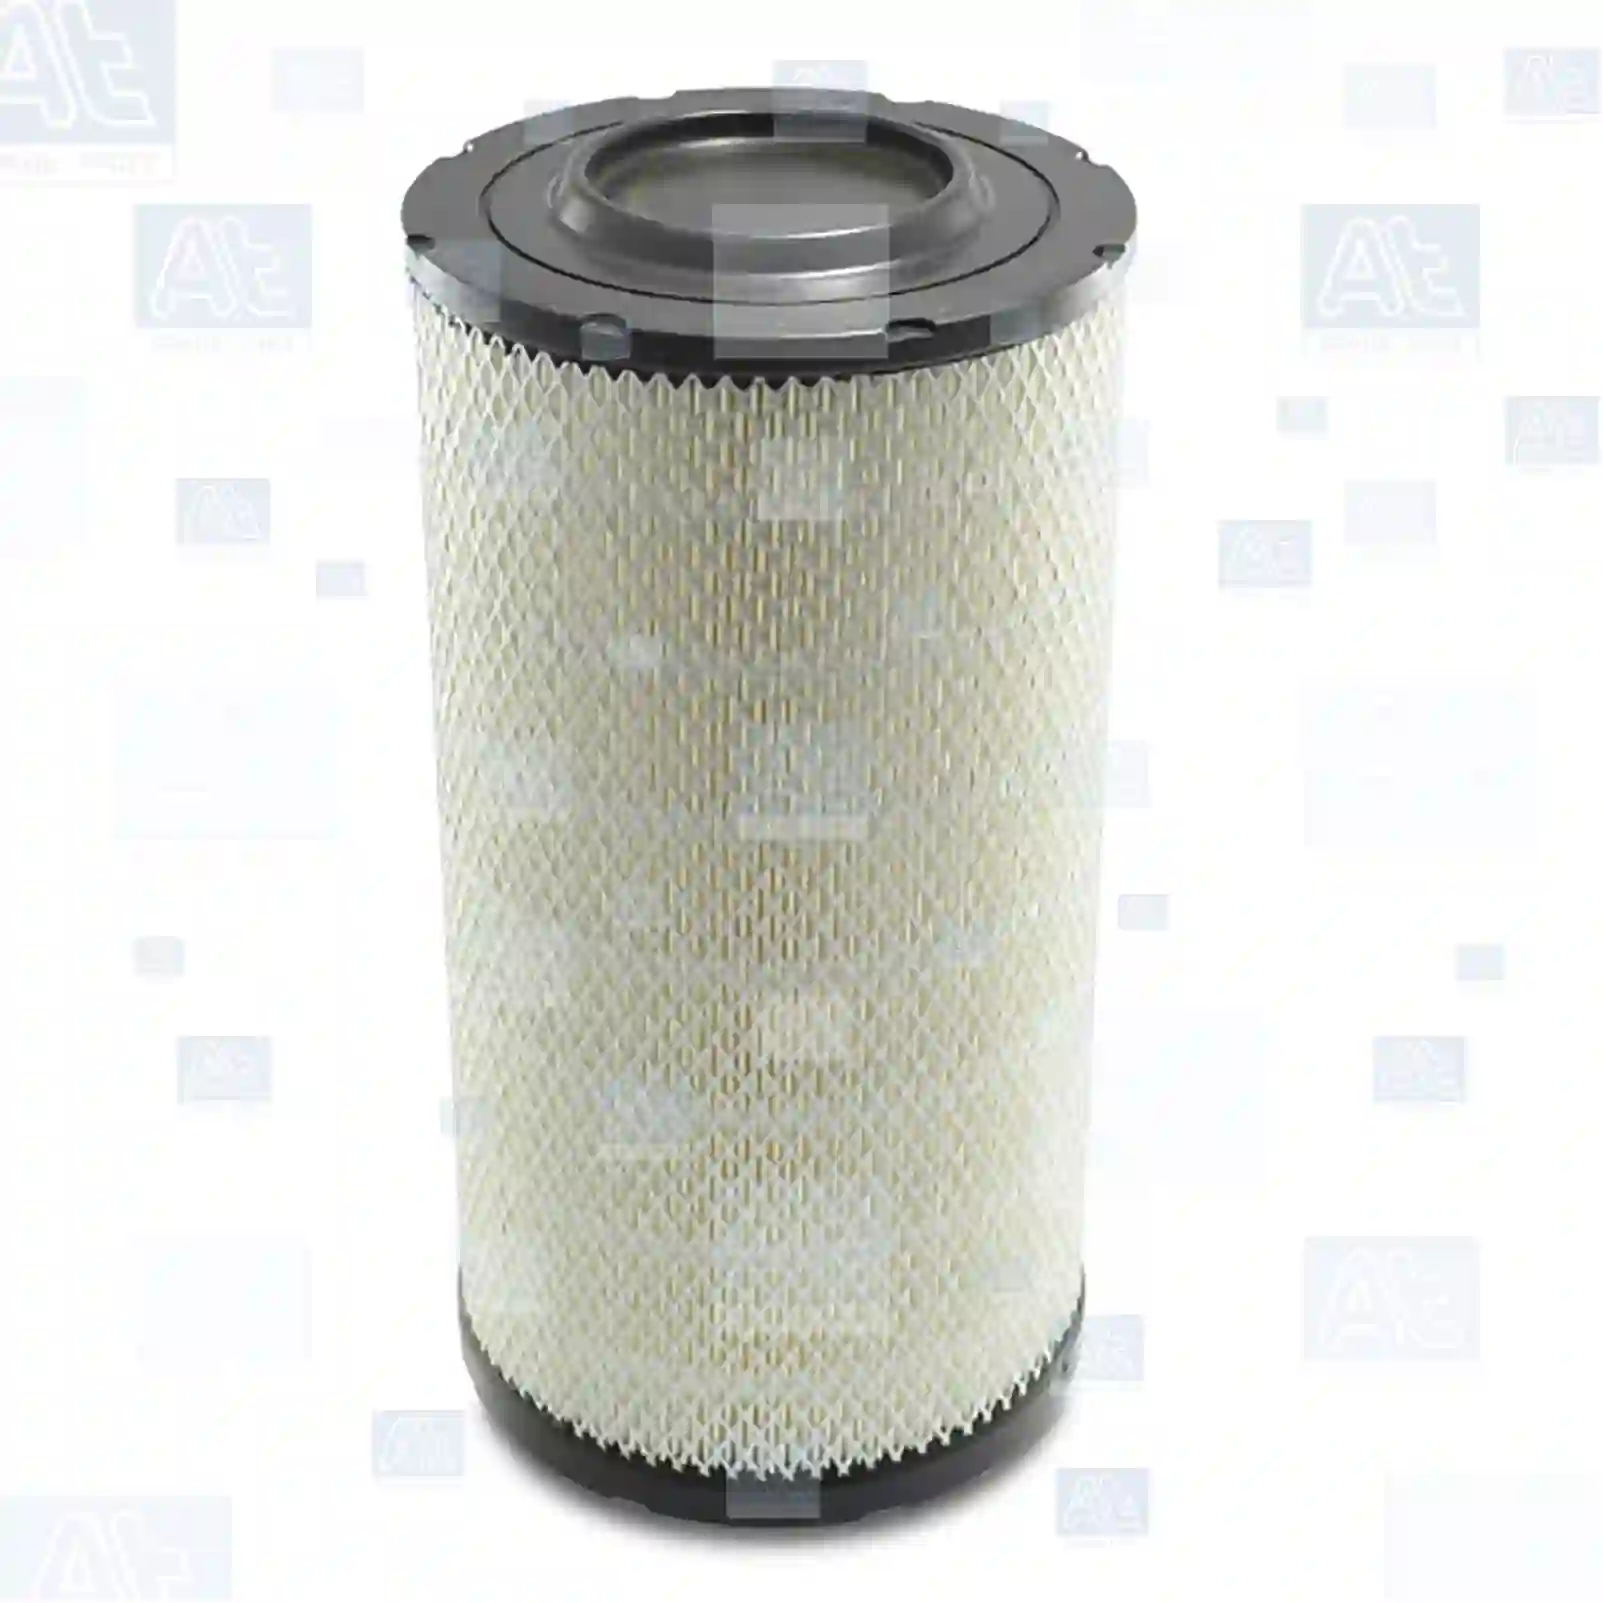 Air filter, 77706188, VA263060, 9P921881, 1931161, 222421A1, 47132345, 6190627M1, 84036676, 84217229, 87418364, 87438248, 87718008, X2950576, 110-6326, 131-8902, 212-4477, 28174T, 0003188260, 0013002800, 6000105759, 6005011111, A123664, 01022530, 09000301, 90003010, 90013816, 01930589, 08032064, 151849148, 72957460, 89002286, 9304100168, 4918199M1, 2640237011, 4206098, 4285619, 4484537, 4486002, 71471917, L4206098, L4486002, 090003010, 01903669, 02992677, 02997050, 02997094, 08032064, 08041642, 1903669, 2992677, 2997050, 500038750, 504064501, 504336841, 99478393, 32/915701, 32915701, AT169911, AT171853, ER263097, KV16429, PE71011292, RE222242, RE222243, RT6005011111, RT7700039509, 59700-2611-2, 213540051, 3540051M1, 7619404, 3540051M1, 4270033M1, 6190627M1, 6290627M1, VA263060, 3540051M1, 427471A1, 01930589, 47128157, 47132343, 47137832, 72957459, 81930589, 82981152, 84036676, 84217229, 86555826, 86982524, 87418364, 87438248, 87438249, 87631623, 87682989, 87682993, 1403068, 23510342, 26510324, 26510342, 901048, 6005011111, 001022530, 01022530, 090003010, 6190627M1, TR5589RS, 1930589, 16500X686AAND, 11883618, 43904200, 43931948, 6050112, 11911712560, 12395012560, ZG00861-0008 ||  77706188 At Spare Part | Engine, Accelerator Pedal, Camshaft, Connecting Rod, Crankcase, Crankshaft, Cylinder Head, Engine Suspension Mountings, Exhaust Manifold, Exhaust Gas Recirculation, Filter Kits, Flywheel Housing, General Overhaul Kits, Engine, Intake Manifold, Oil Cleaner, Oil Cooler, Oil Filter, Oil Pump, Oil Sump, Piston & Liner, Sensor & Switch, Timing Case, Turbocharger, Cooling System, Belt Tensioner, Coolant Filter, Coolant Pipe, Corrosion Prevention Agent, Drive, Expansion Tank, Fan, Intercooler, Monitors & Gauges, Radiator, Thermostat, V-Belt / Timing belt, Water Pump, Fuel System, Electronical Injector Unit, Feed Pump, Fuel Filter, cpl., Fuel Gauge Sender,  Fuel Line, Fuel Pump, Fuel Tank, Injection Line Kit, Injection Pump, Exhaust System, Clutch & Pedal, Gearbox, Propeller Shaft, Axles, Brake System, Hubs & Wheels, Suspension, Leaf Spring, Universal Parts / Accessories, Steering, Electrical System, Cabin Air filter, 77706188, VA263060, 9P921881, 1931161, 222421A1, 47132345, 6190627M1, 84036676, 84217229, 87418364, 87438248, 87718008, X2950576, 110-6326, 131-8902, 212-4477, 28174T, 0003188260, 0013002800, 6000105759, 6005011111, A123664, 01022530, 09000301, 90003010, 90013816, 01930589, 08032064, 151849148, 72957460, 89002286, 9304100168, 4918199M1, 2640237011, 4206098, 4285619, 4484537, 4486002, 71471917, L4206098, L4486002, 090003010, 01903669, 02992677, 02997050, 02997094, 08032064, 08041642, 1903669, 2992677, 2997050, 500038750, 504064501, 504336841, 99478393, 32/915701, 32915701, AT169911, AT171853, ER263097, KV16429, PE71011292, RE222242, RE222243, RT6005011111, RT7700039509, 59700-2611-2, 213540051, 3540051M1, 7619404, 3540051M1, 4270033M1, 6190627M1, 6290627M1, VA263060, 3540051M1, 427471A1, 01930589, 47128157, 47132343, 47137832, 72957459, 81930589, 82981152, 84036676, 84217229, 86555826, 86982524, 87418364, 87438248, 87438249, 87631623, 87682989, 87682993, 1403068, 23510342, 26510324, 26510342, 901048, 6005011111, 001022530, 01022530, 090003010, 6190627M1, TR5589RS, 1930589, 16500X686AAND, 11883618, 43904200, 43931948, 6050112, 11911712560, 12395012560, ZG00861-0008 ||  77706188 At Spare Part | Engine, Accelerator Pedal, Camshaft, Connecting Rod, Crankcase, Crankshaft, Cylinder Head, Engine Suspension Mountings, Exhaust Manifold, Exhaust Gas Recirculation, Filter Kits, Flywheel Housing, General Overhaul Kits, Engine, Intake Manifold, Oil Cleaner, Oil Cooler, Oil Filter, Oil Pump, Oil Sump, Piston & Liner, Sensor & Switch, Timing Case, Turbocharger, Cooling System, Belt Tensioner, Coolant Filter, Coolant Pipe, Corrosion Prevention Agent, Drive, Expansion Tank, Fan, Intercooler, Monitors & Gauges, Radiator, Thermostat, V-Belt / Timing belt, Water Pump, Fuel System, Electronical Injector Unit, Feed Pump, Fuel Filter, cpl., Fuel Gauge Sender,  Fuel Line, Fuel Pump, Fuel Tank, Injection Line Kit, Injection Pump, Exhaust System, Clutch & Pedal, Gearbox, Propeller Shaft, Axles, Brake System, Hubs & Wheels, Suspension, Leaf Spring, Universal Parts / Accessories, Steering, Electrical System, Cabin